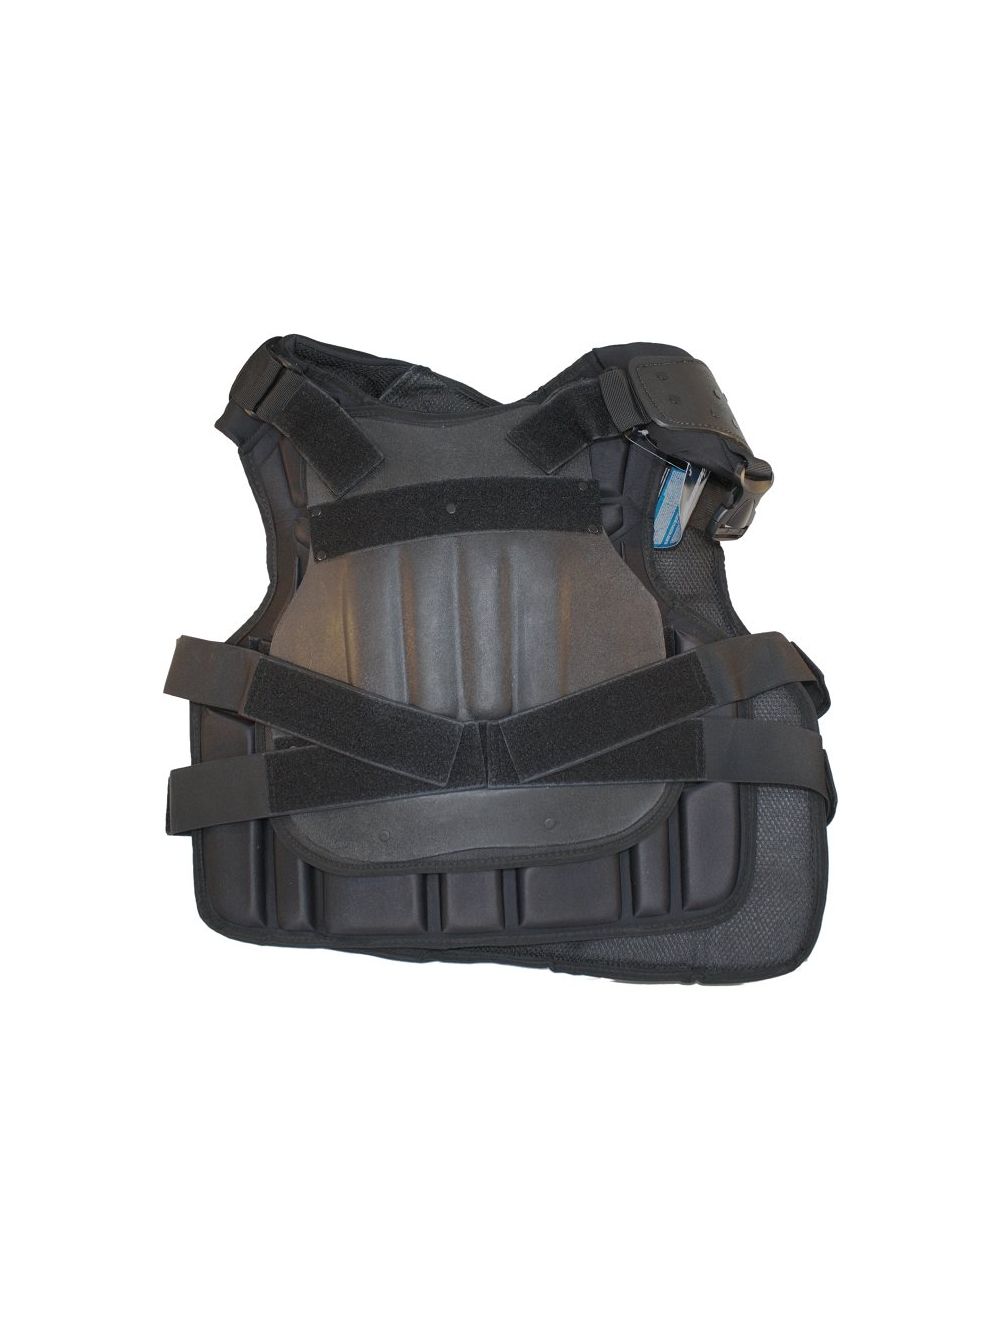 Exotech Upper Body & Shoulder Protection